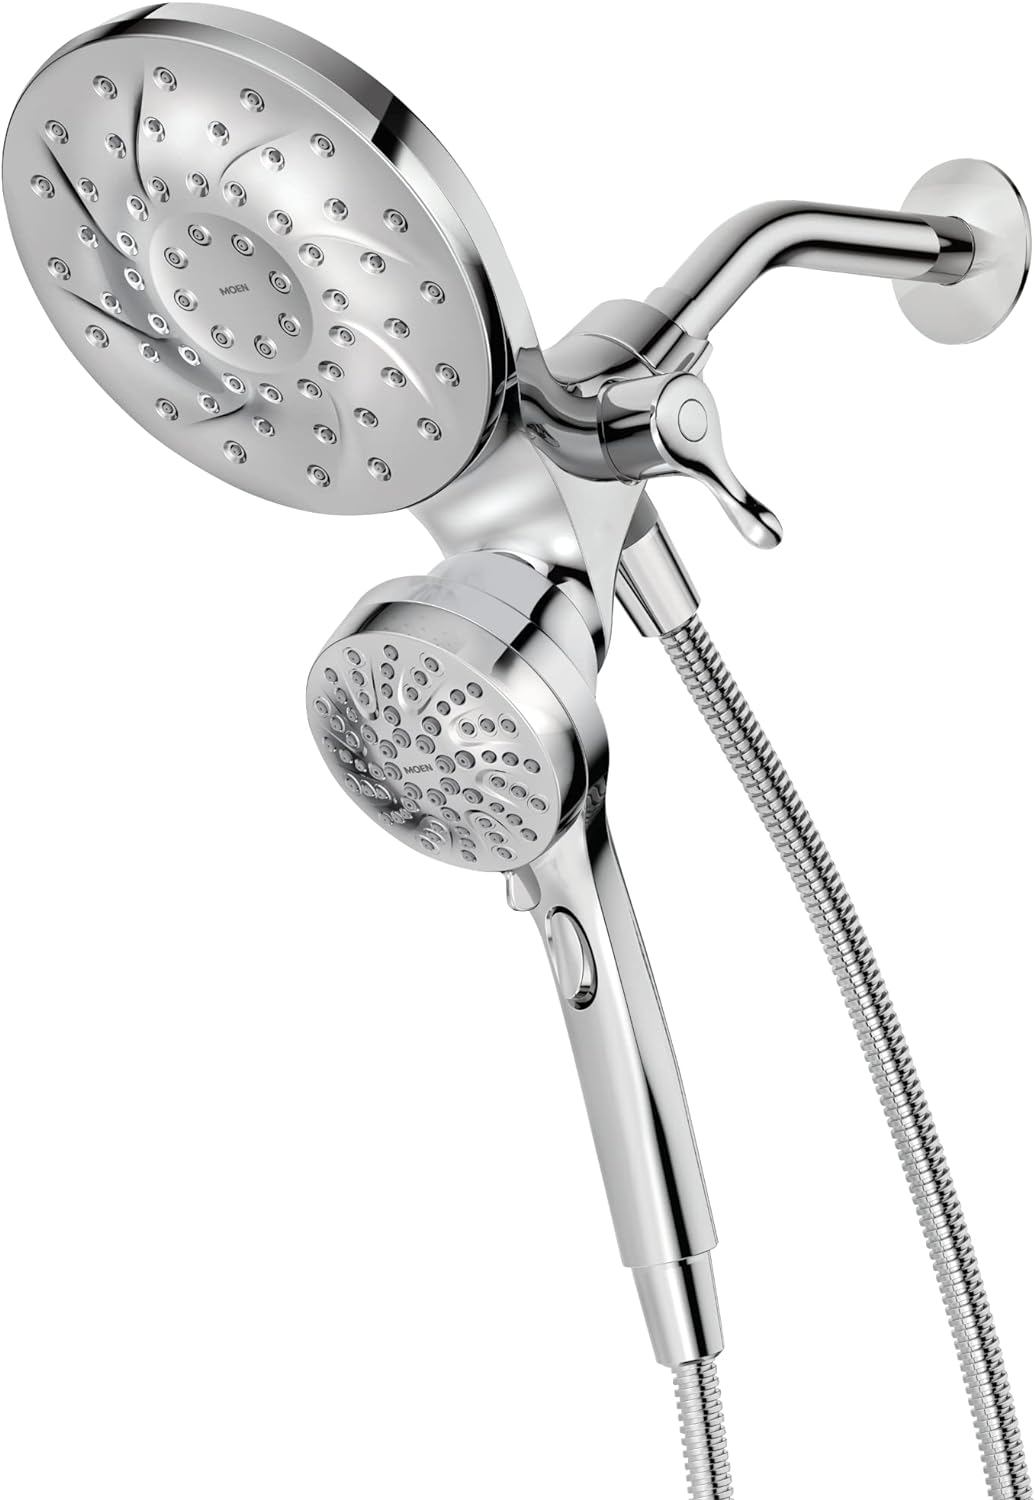 Moen Engage Magnetix Chrome 2.5 GPM Handheld/Rain Shower Head 2-in-1 Combo Featuring Magnetic Docking System, Rain Shower Head with Removable Handheld Spray, 26009